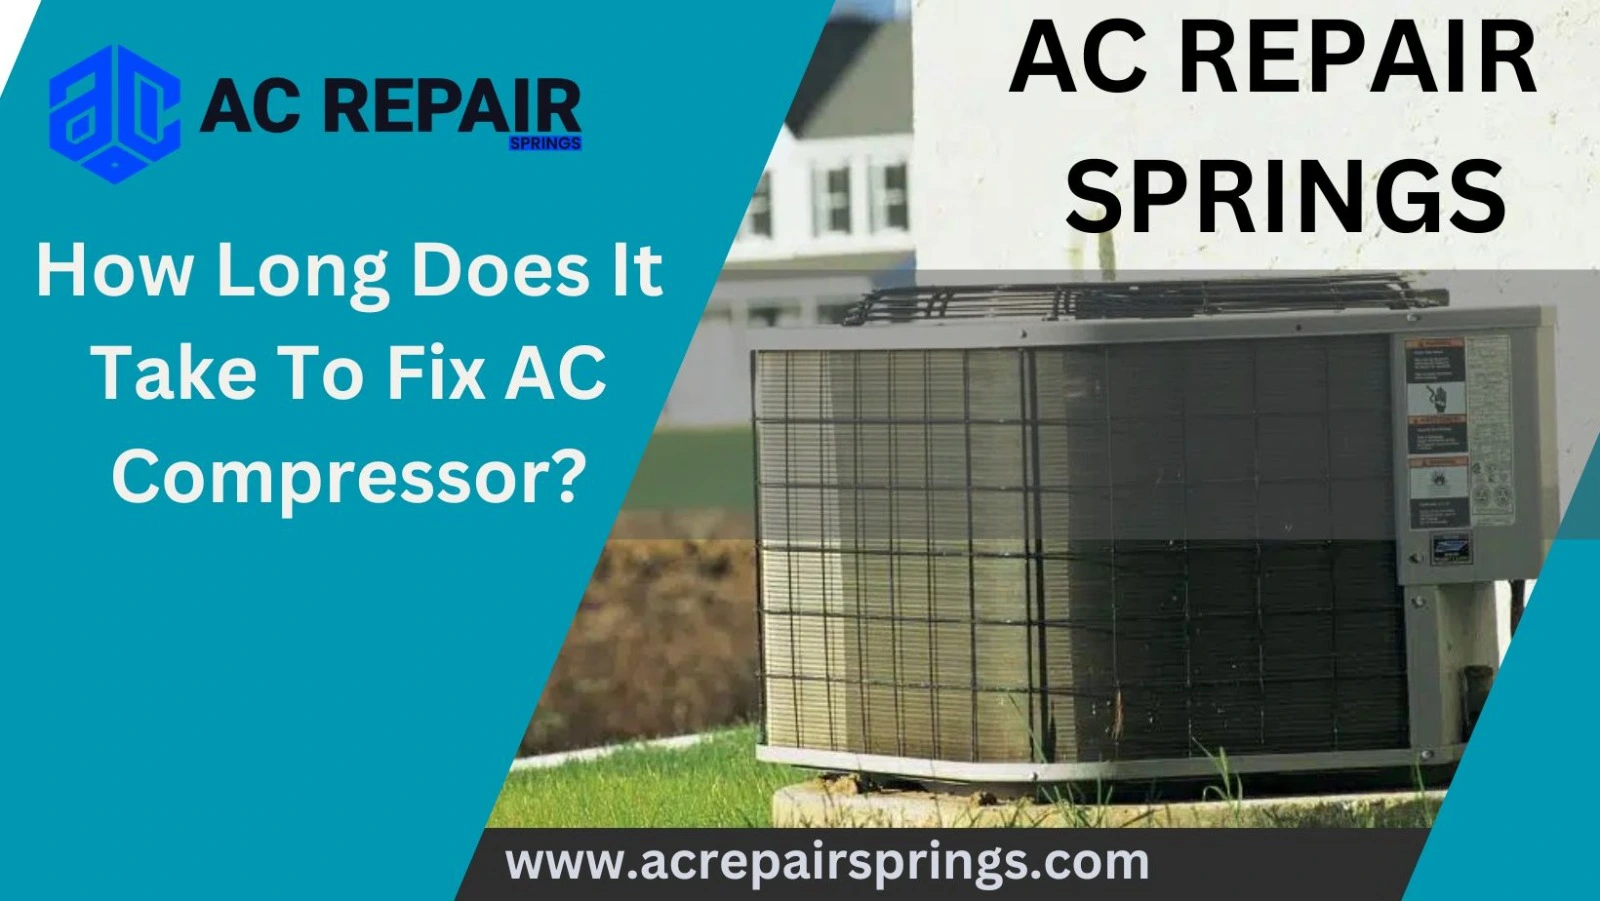 How Long Does It Take To Fix AC Compressor?